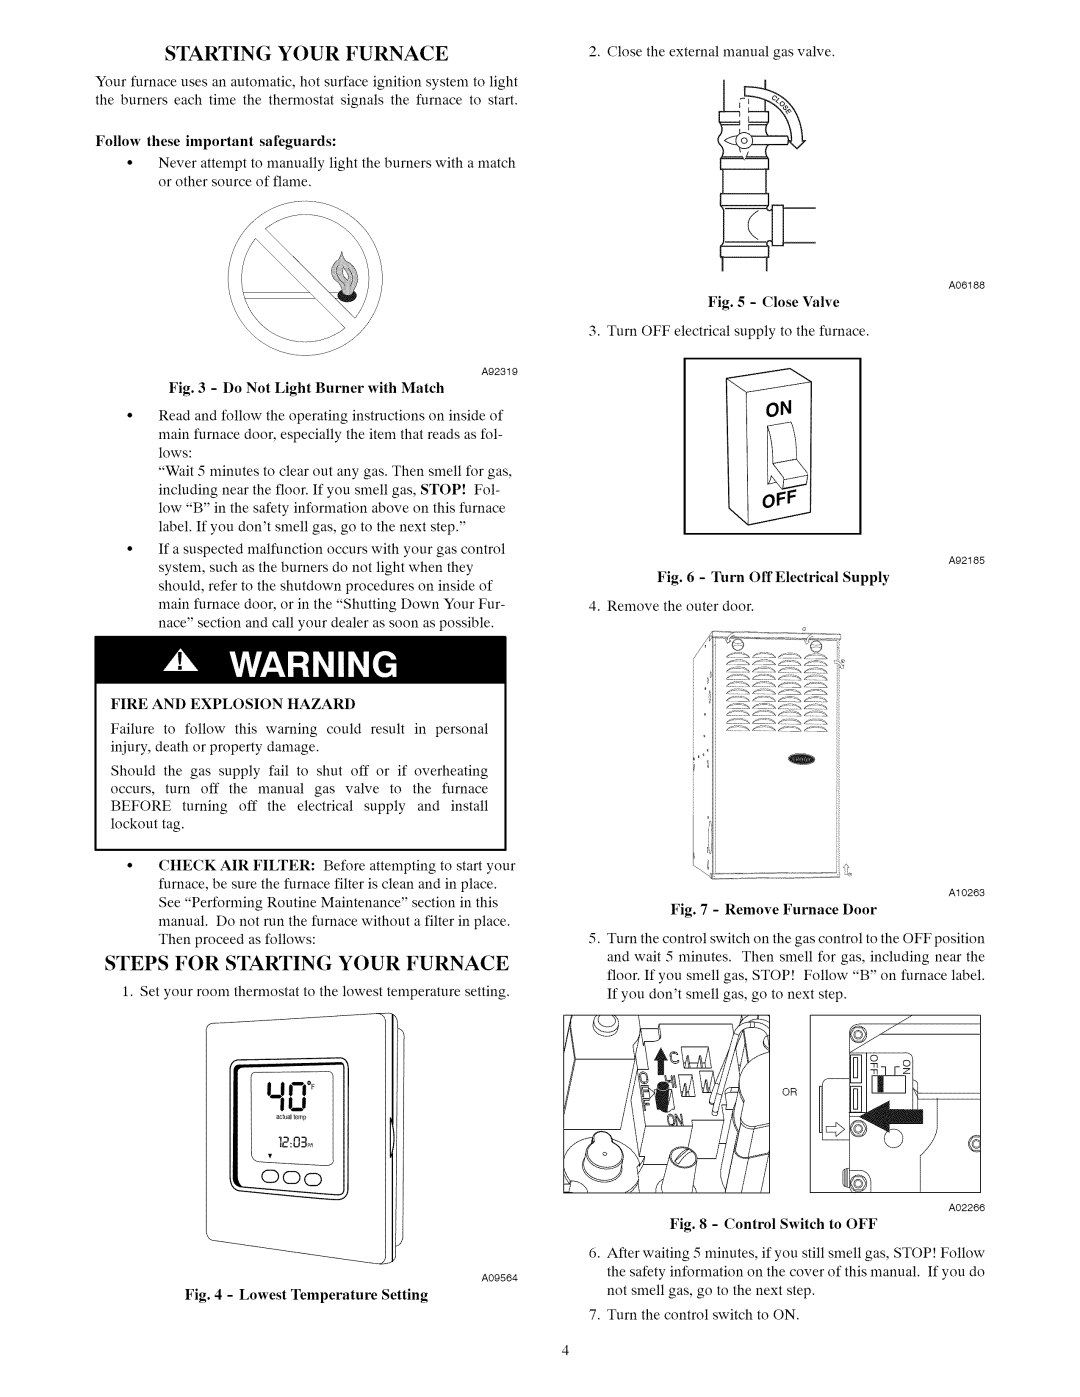 Carrier A10247 owner manual Steps For Starting Your Furnace, Remove Furnace Door, Control Switch to OFF 